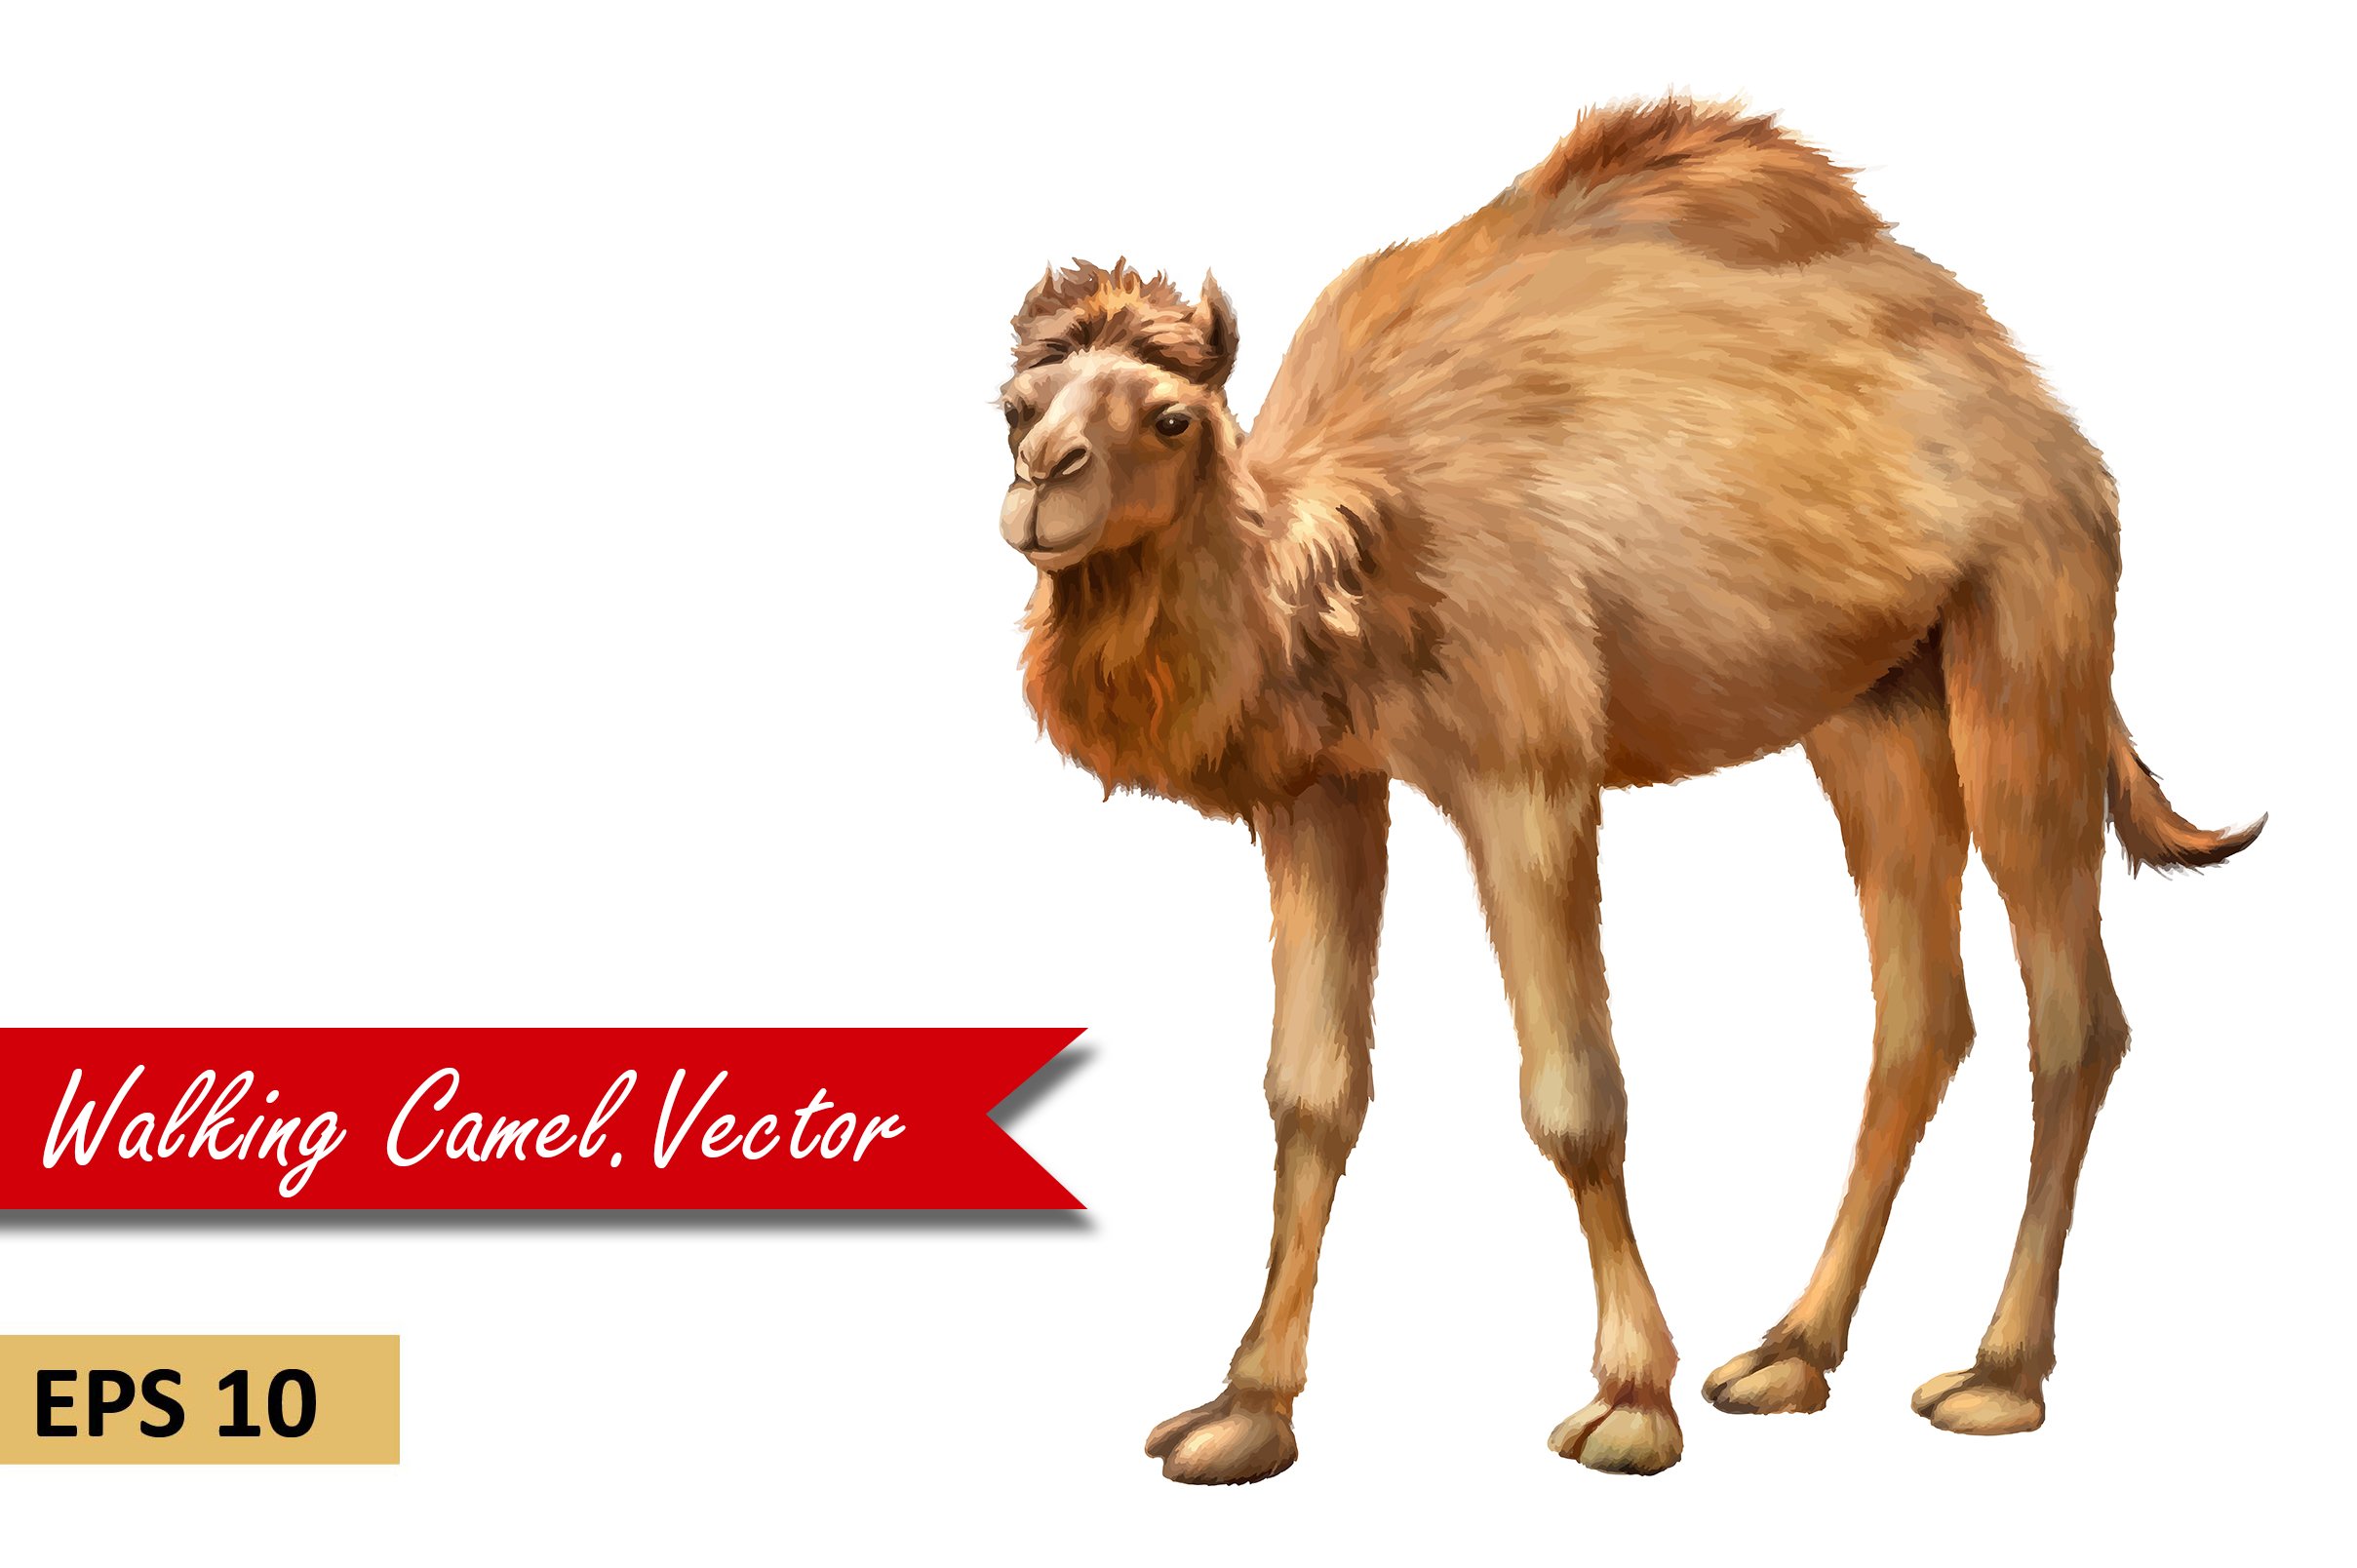 Domestic Camel. Vector cover image.